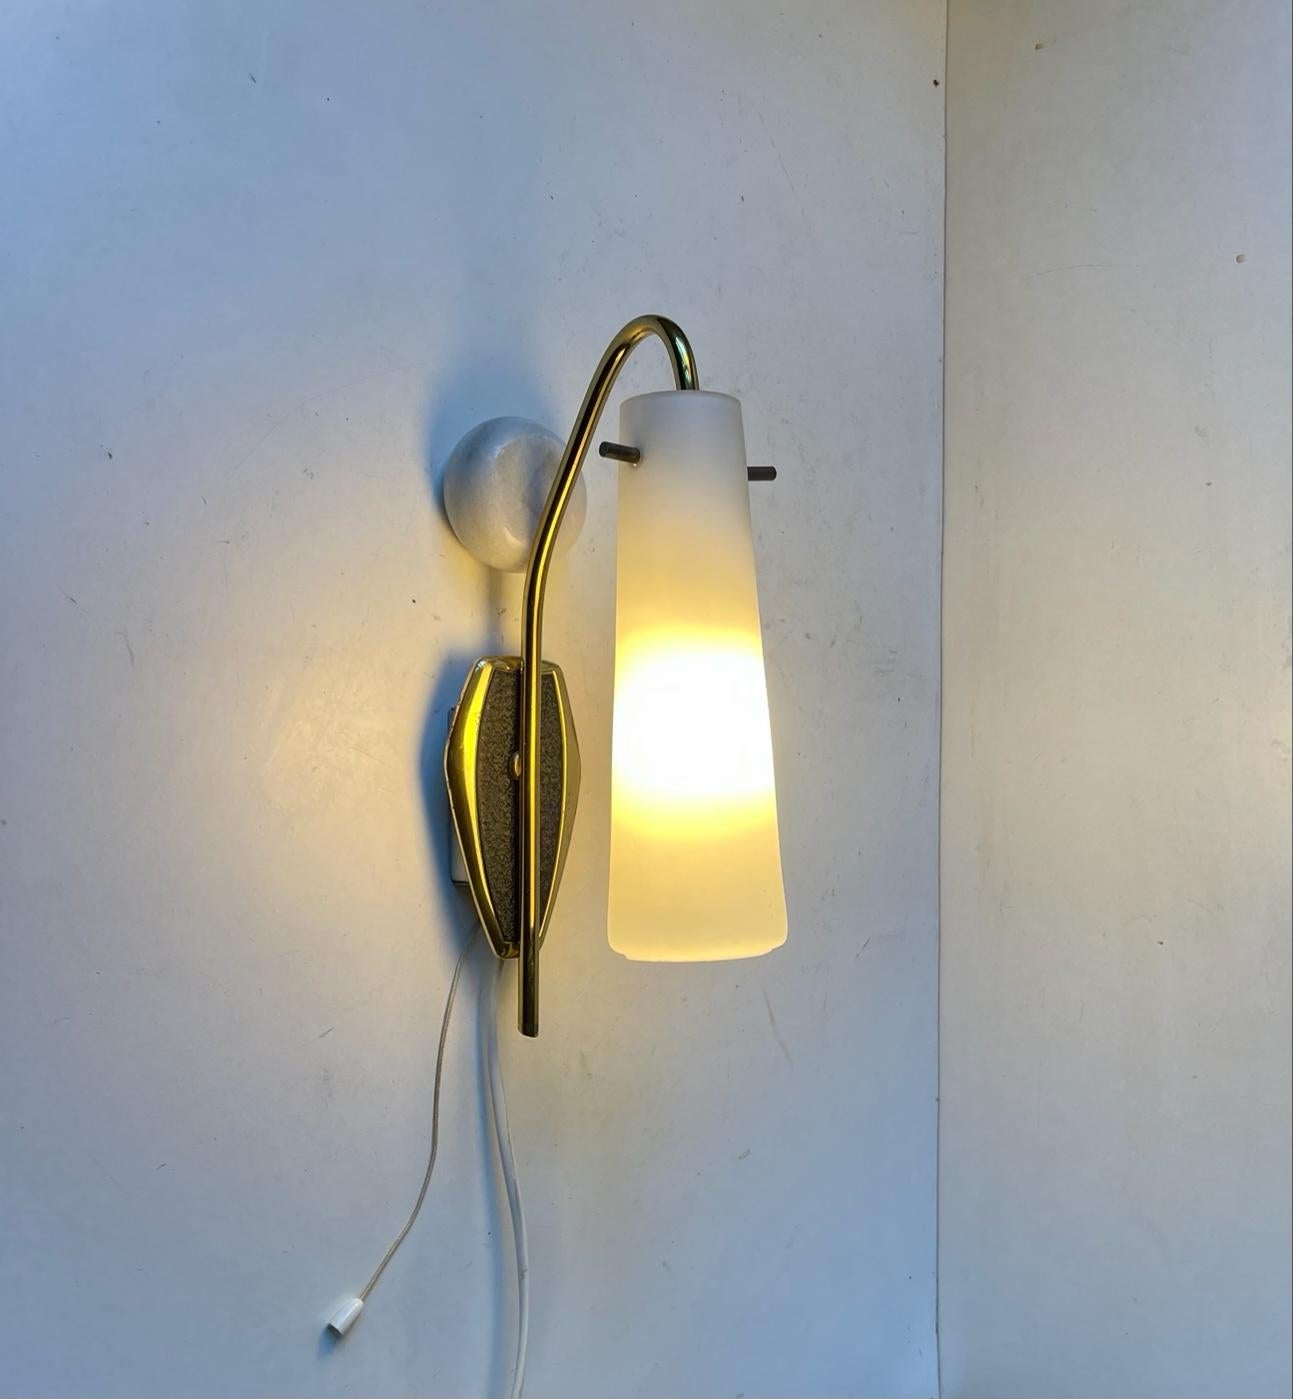 Mid-Century Modern Scandinavian Wall Sconce in Brass and White Glass, 1950s For Sale